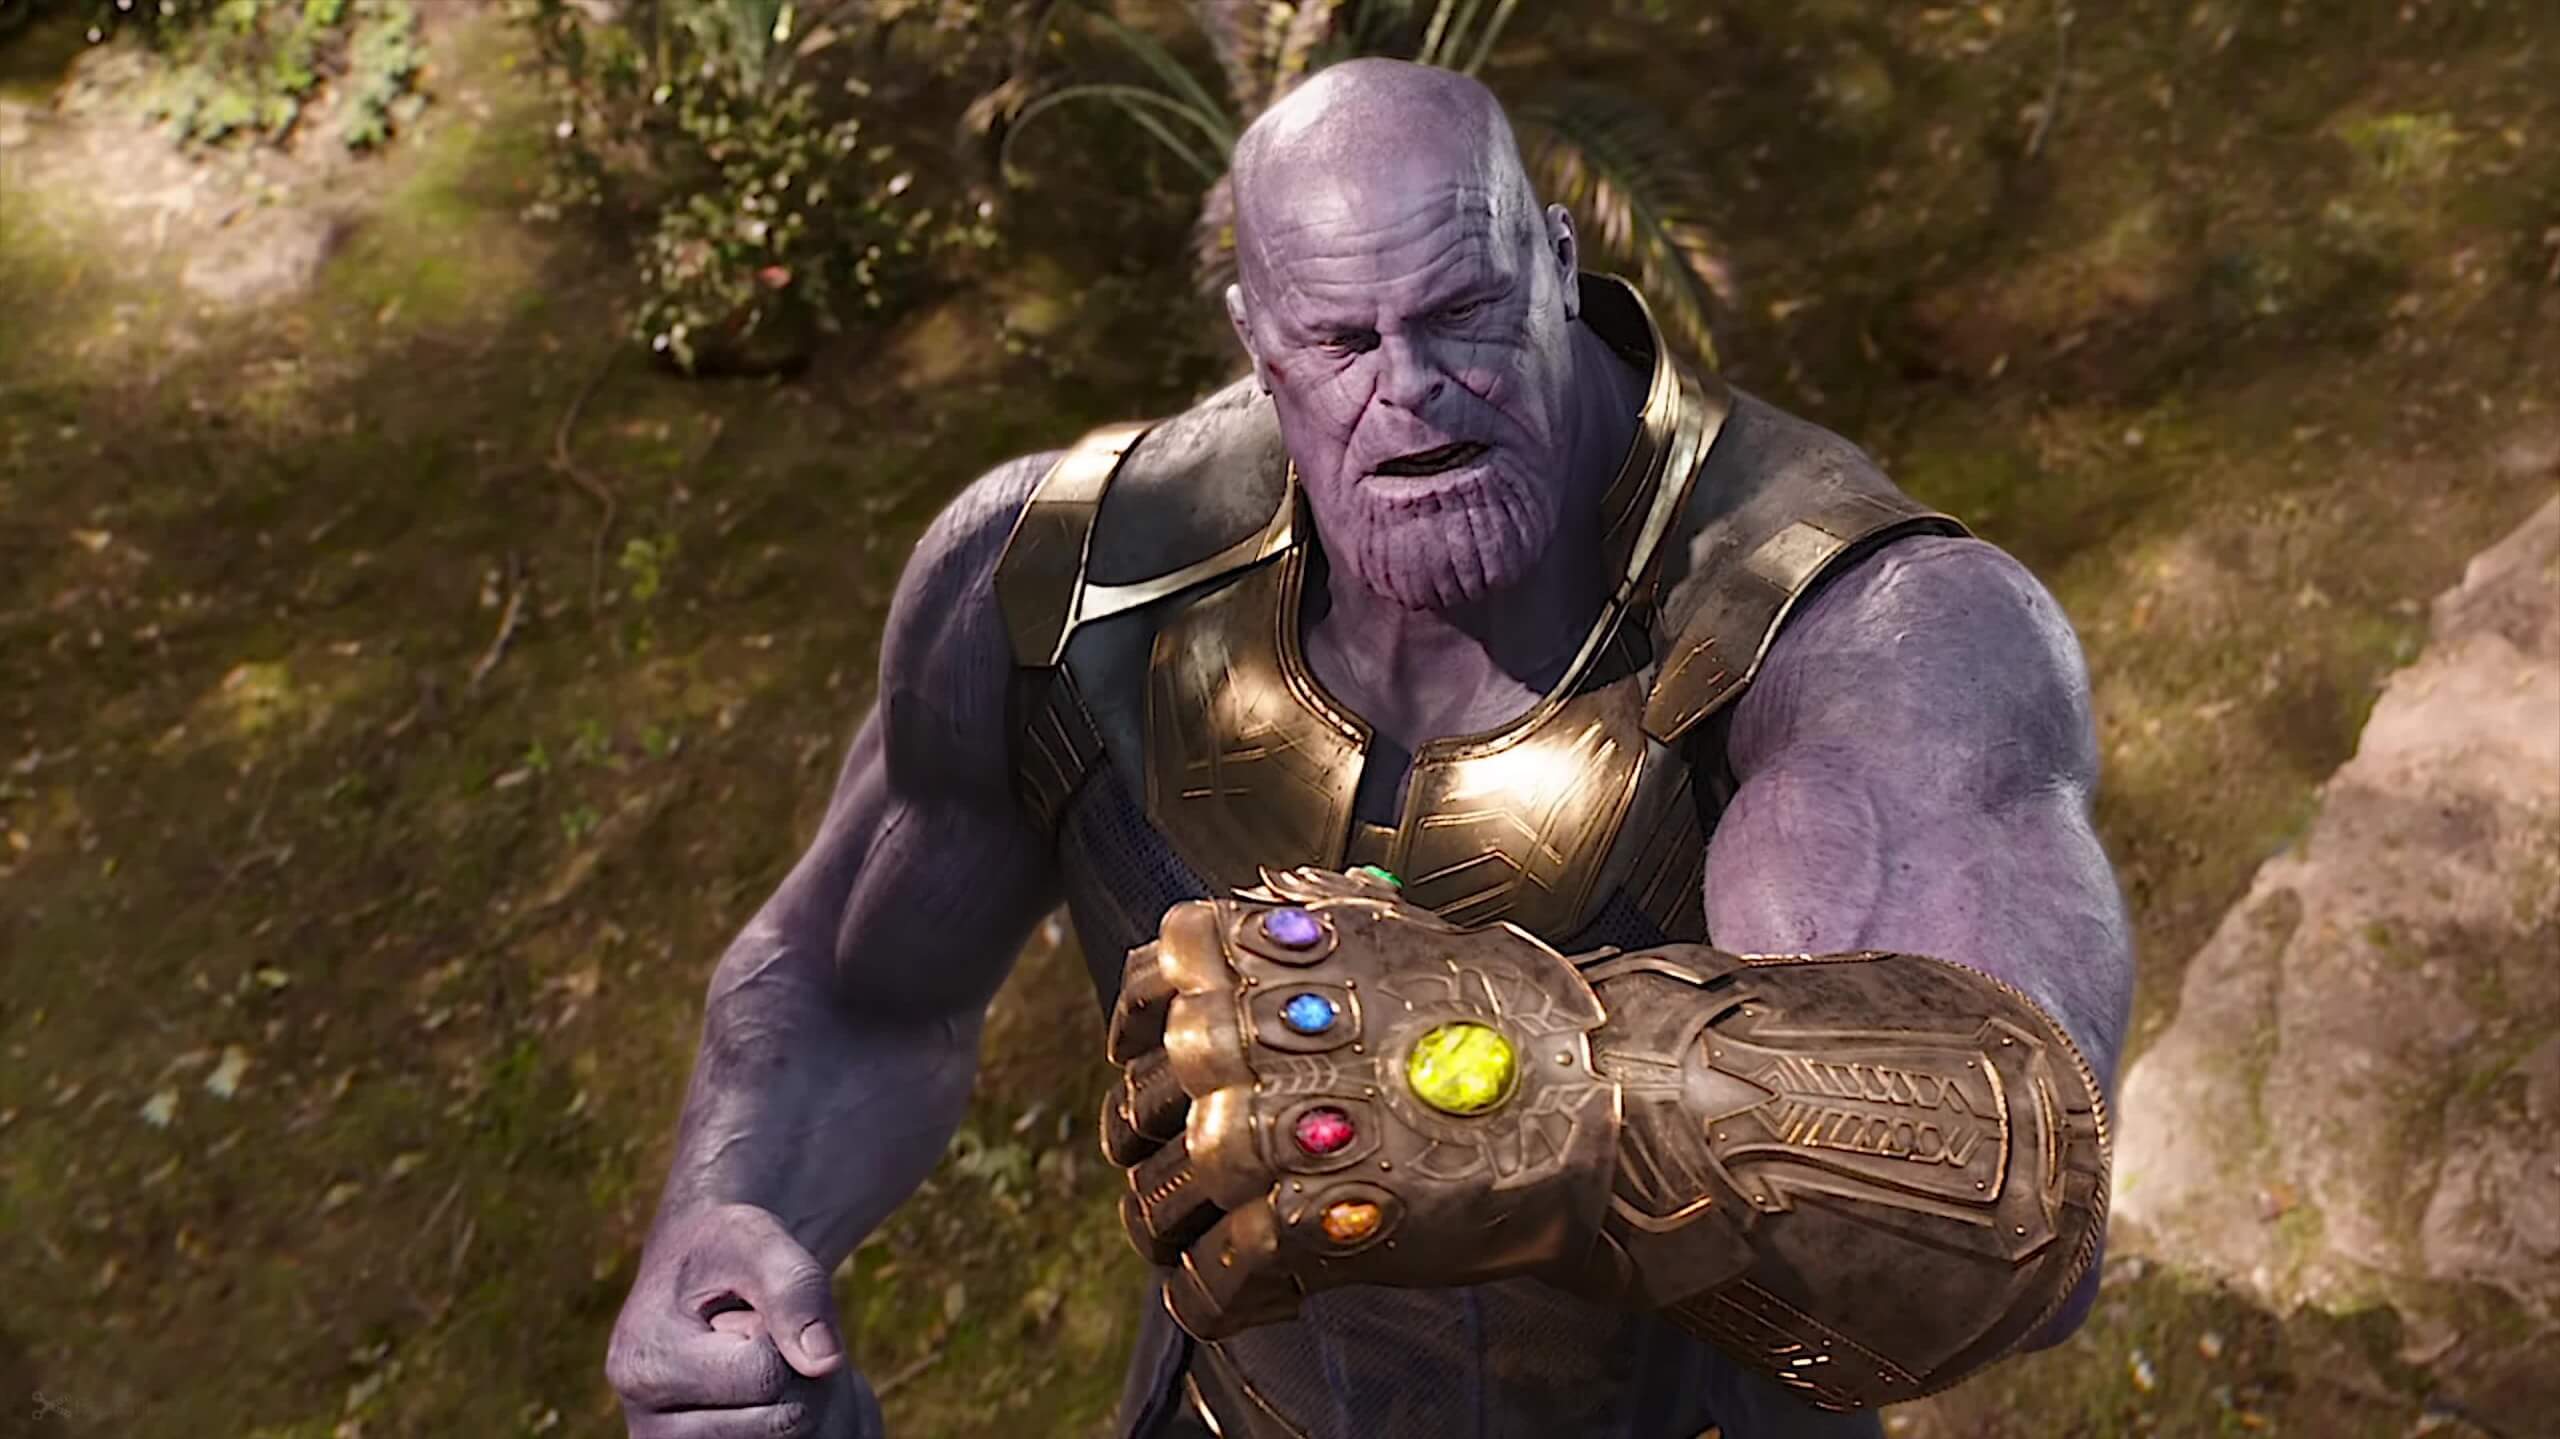 Google tips its hat to Avengers: Endgame with a Thanos Easter egg